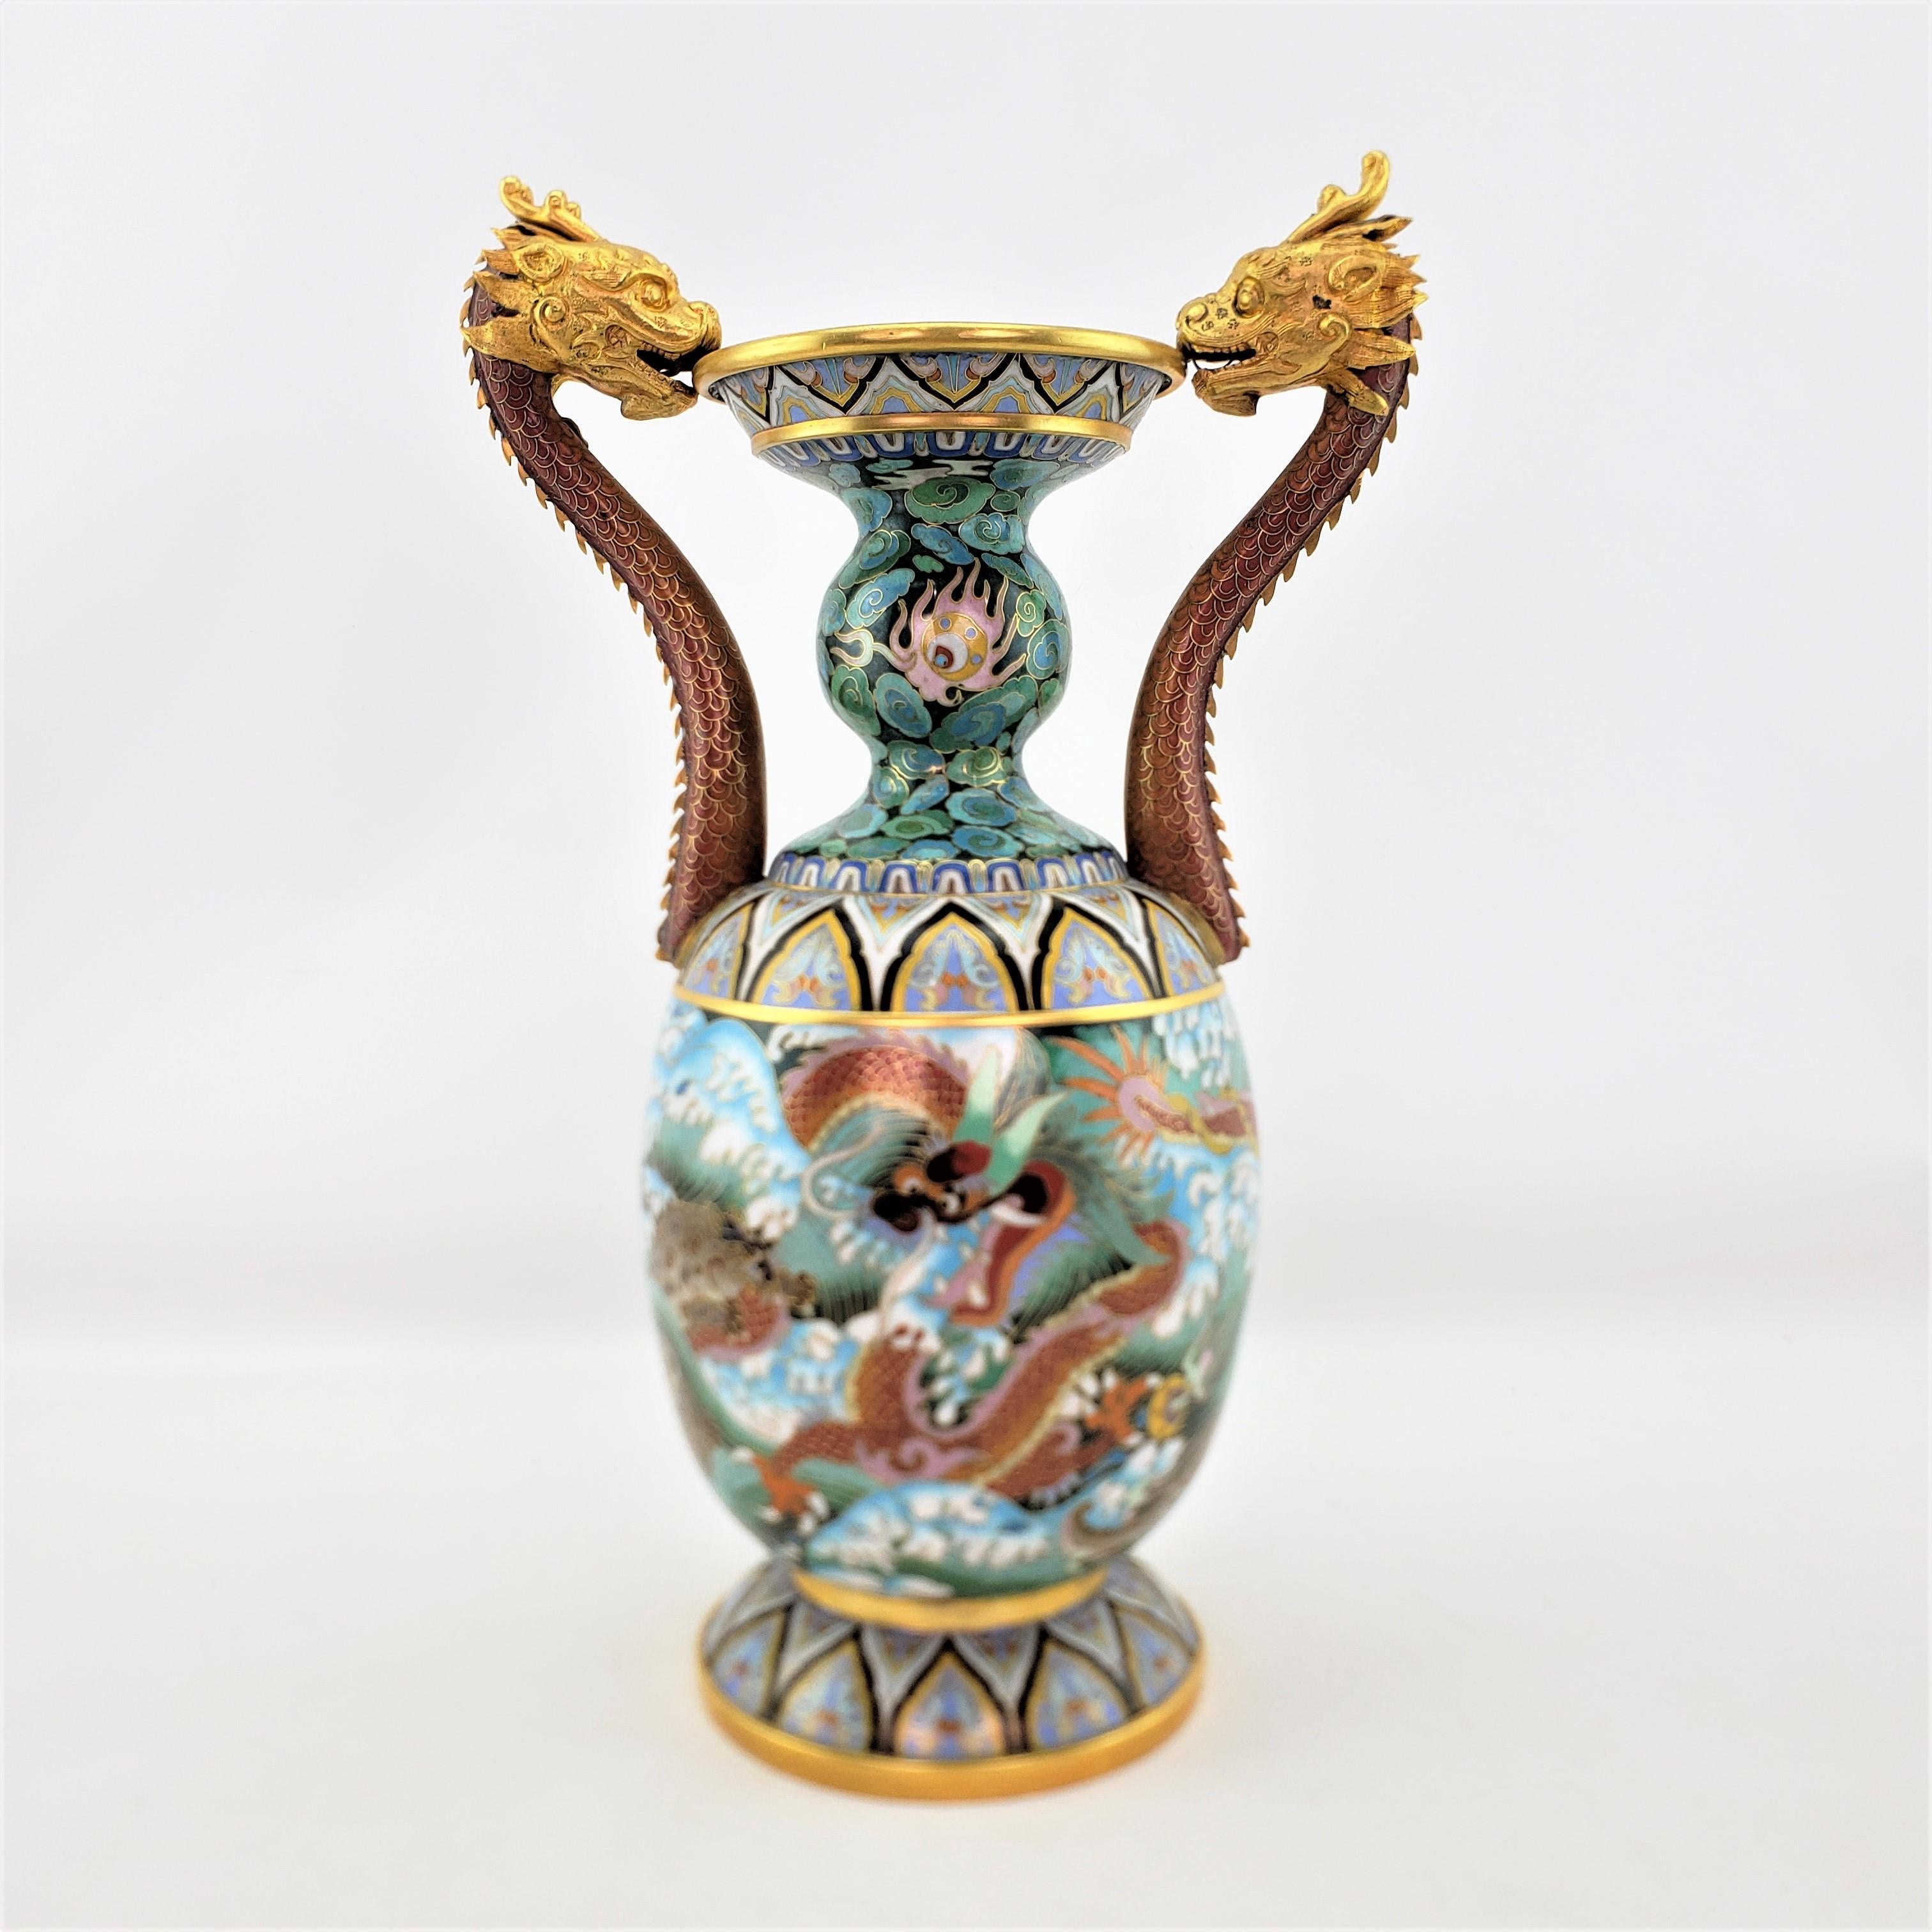 Chinese Export Large Vintage Decorative Chinese Cloissone Vase with Imperial Dragon Handles For Sale